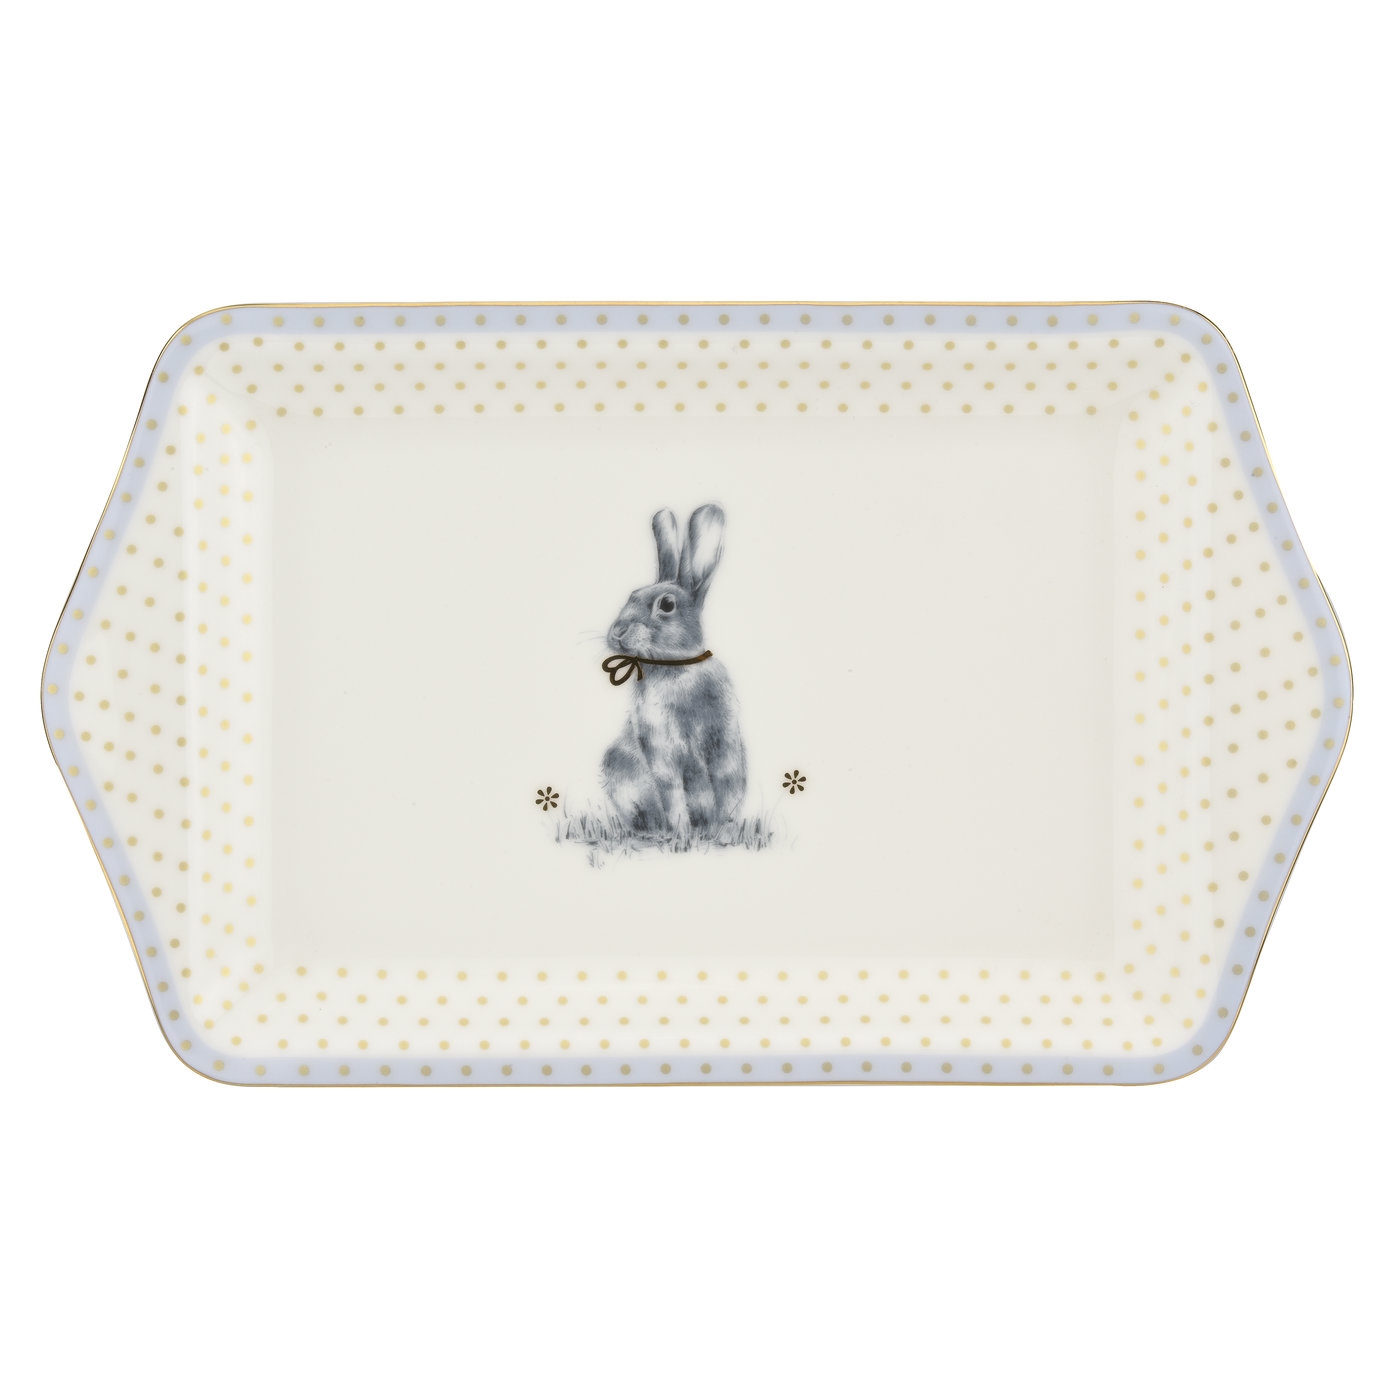 Spode Meadow Lane Dessert Tray image number null